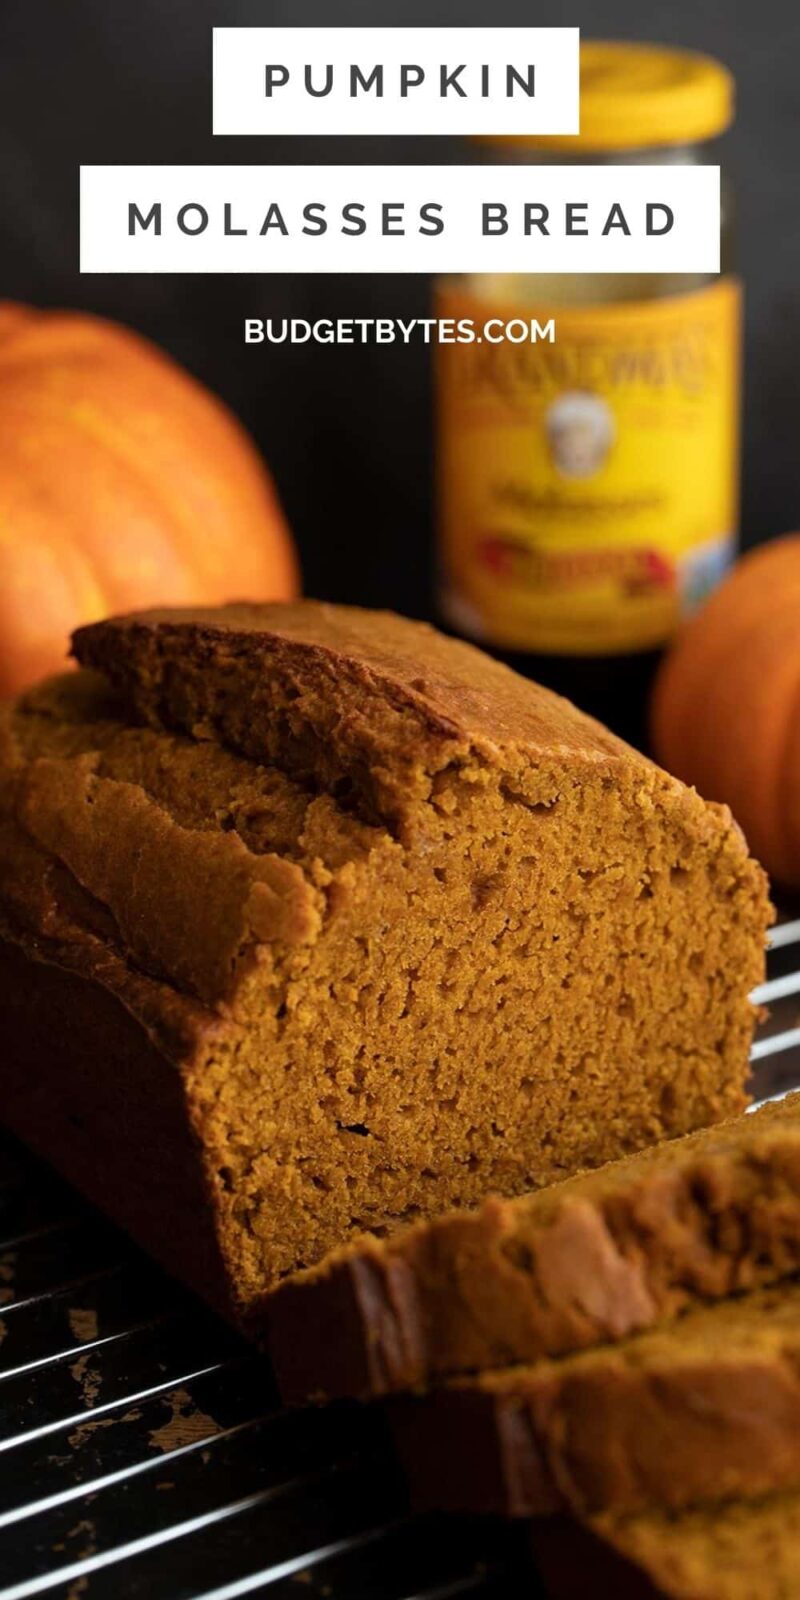 Pumpkin molasses bread sliced, side view, title text at the top